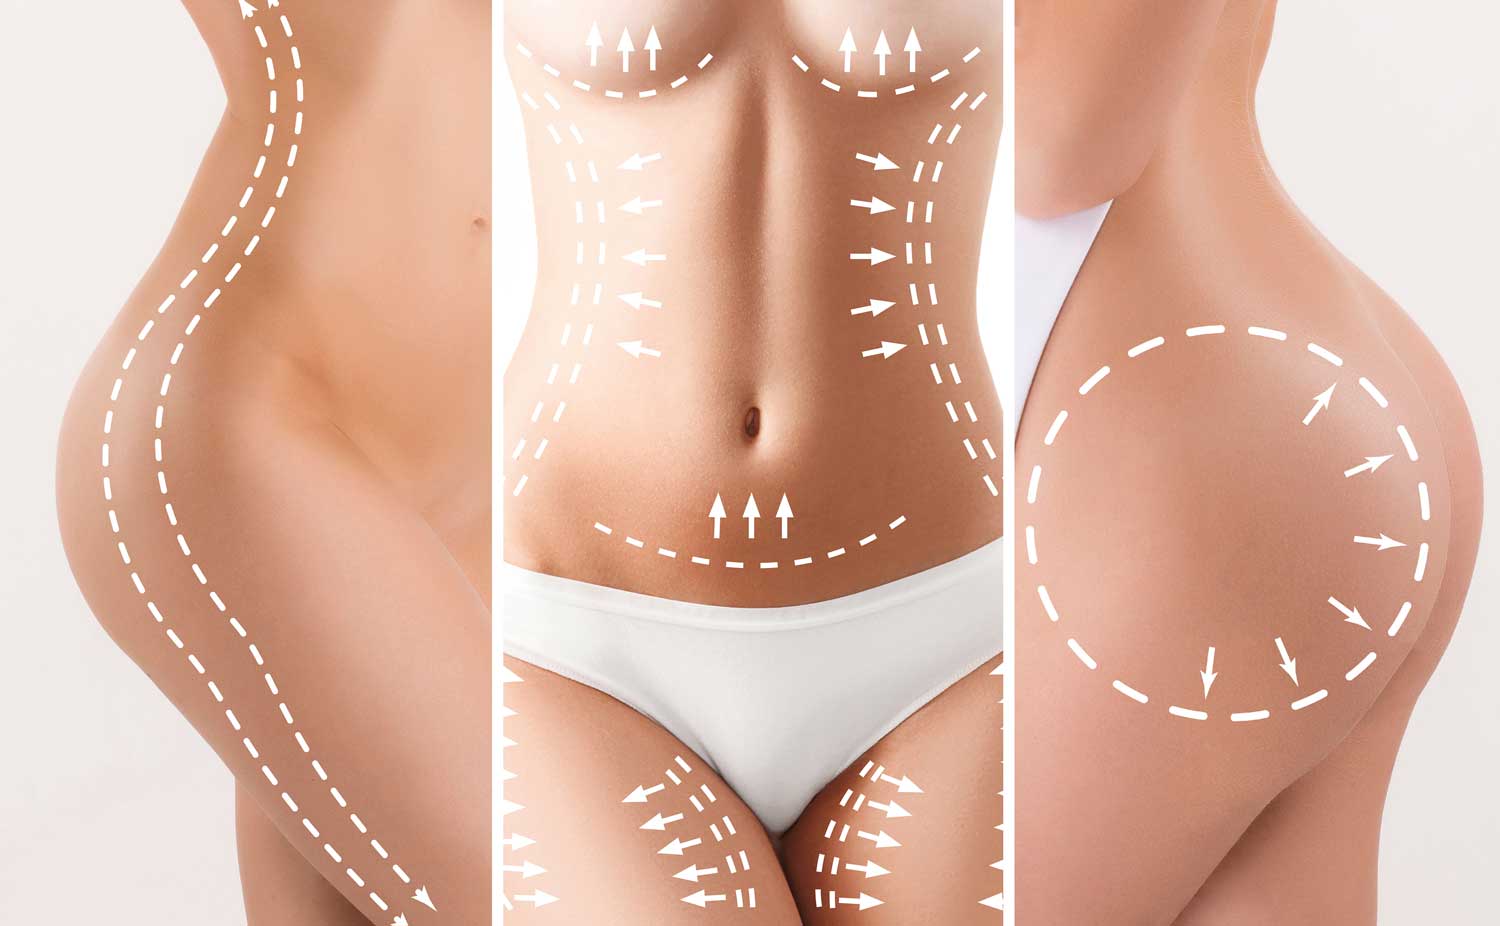 What Is The Best Procedure Between A Tummy Tuck And A Mommy Makeover?